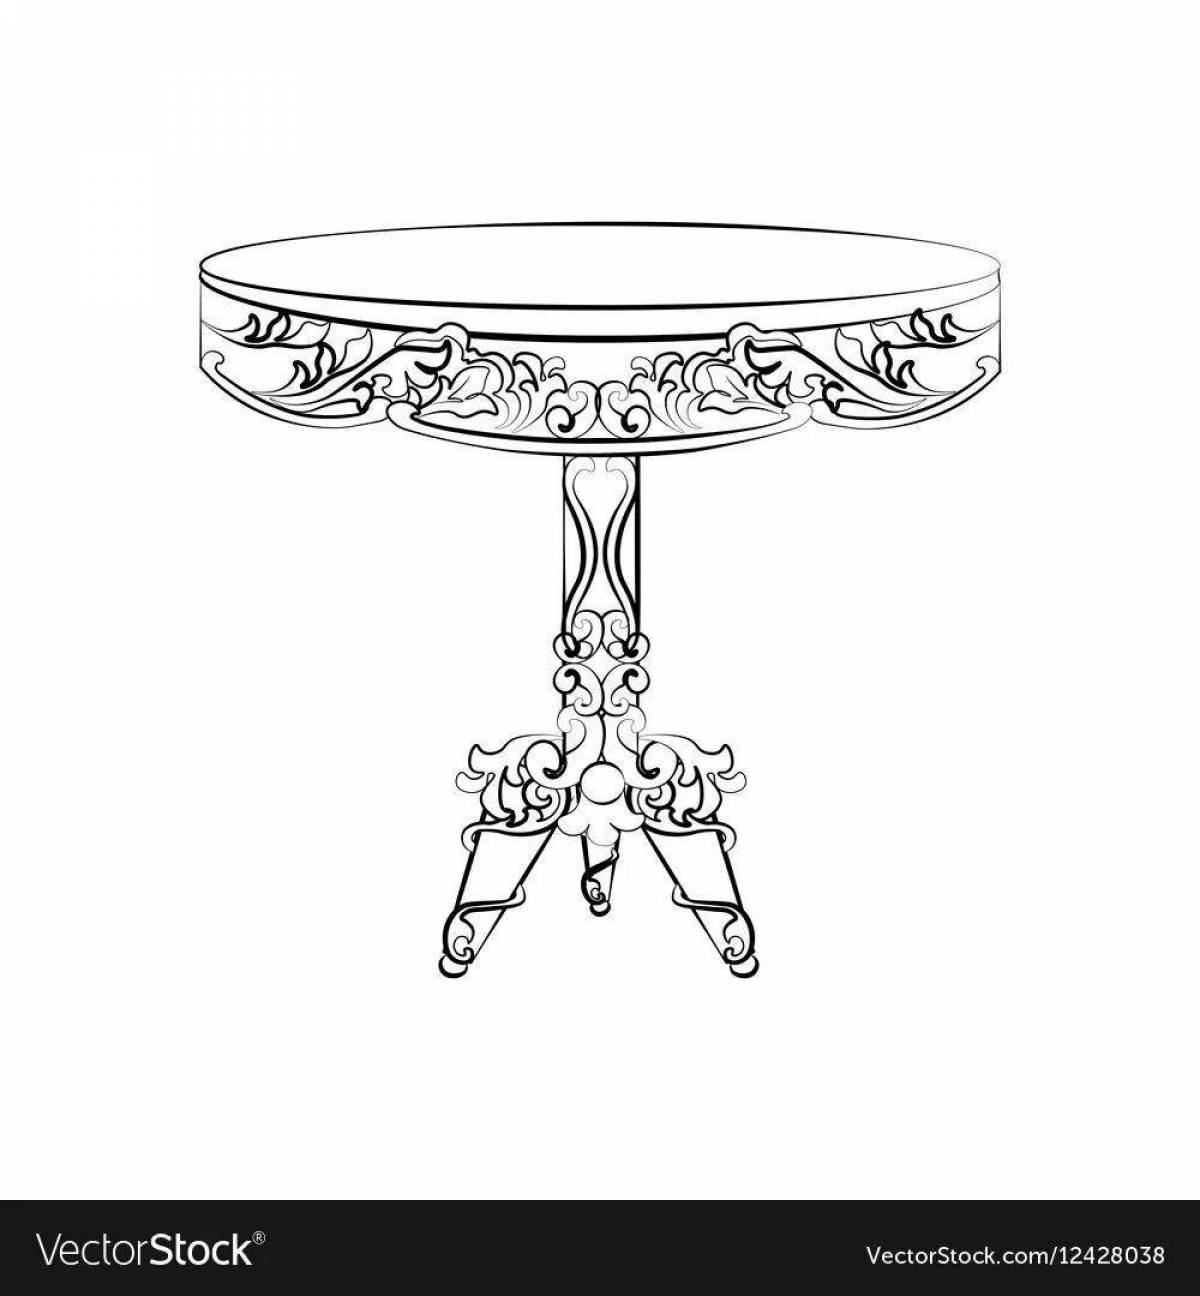 Coloring page unusual round table